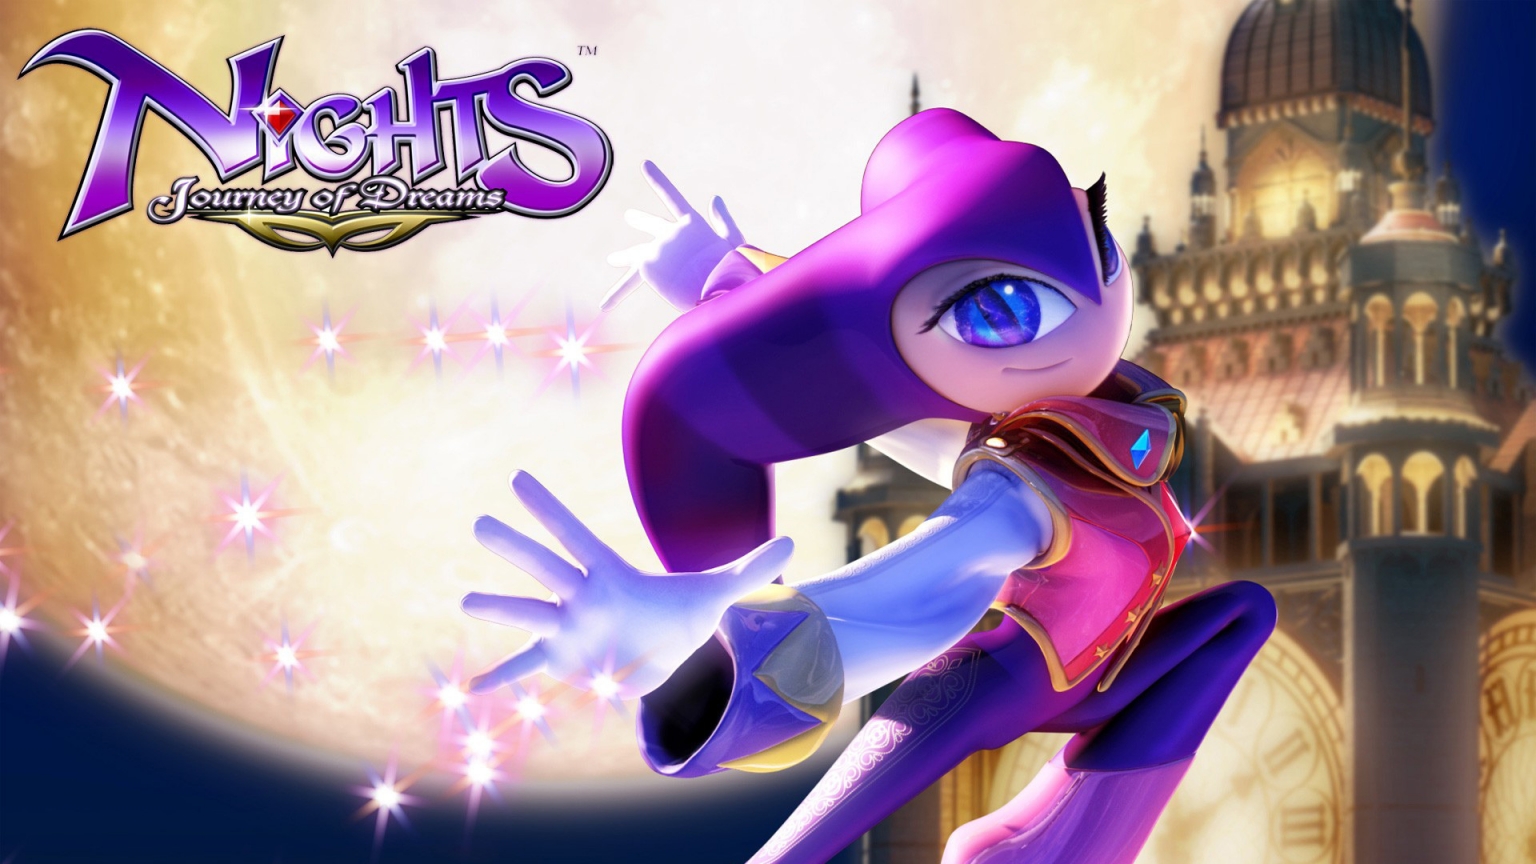 NiGHTS: Journey of Dreams for 1536 x 864 HDTV resolution